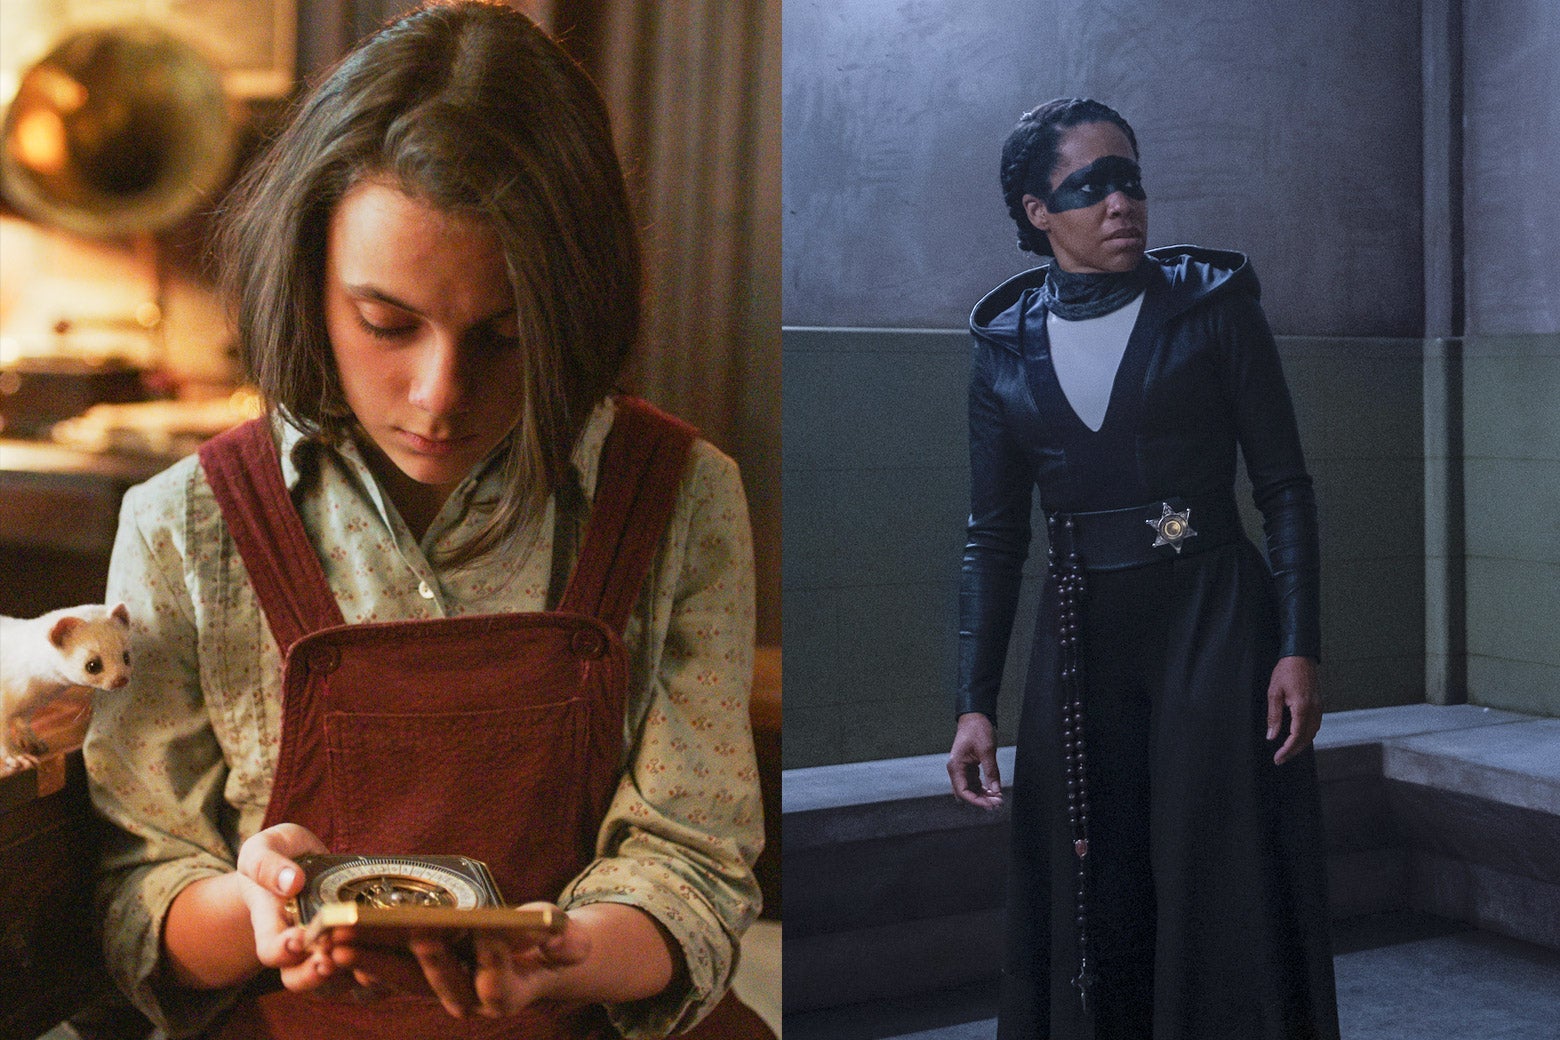 Side-by-side photo illustration of Dafne Keen as Lyra Belacqua reading a tool in His Dark Materials, and Regina King in her Sister Night regalia on Watchmen.